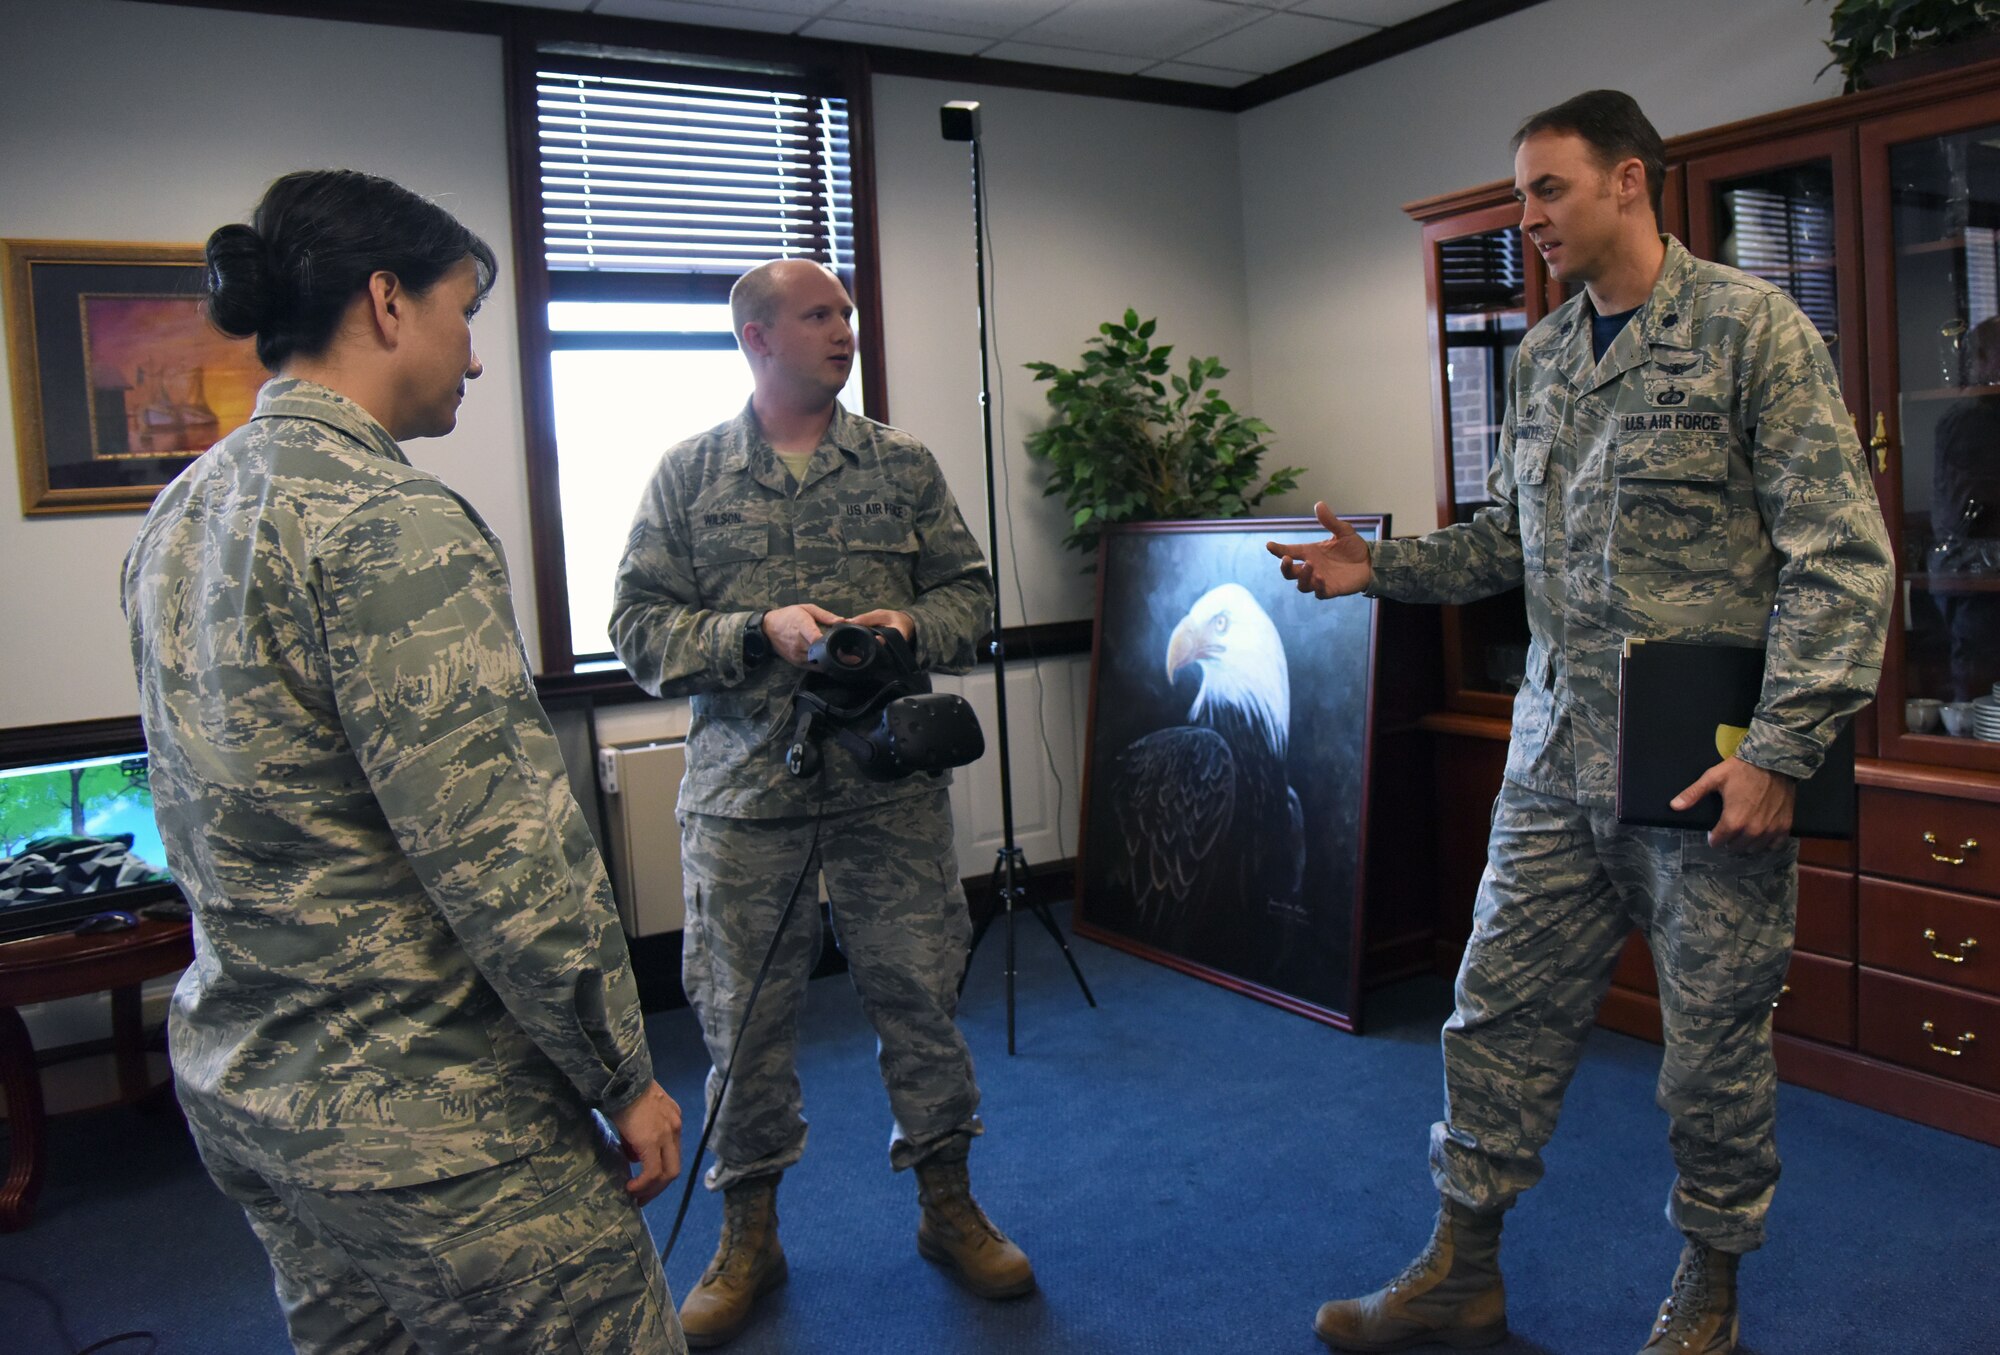 U.S. Air Force Lt. Col. Stephen Arnott, 81st Training Support Squadron commander, and Staff Sgt. Chris Wilson, 81st TRSS instructional developer, explain the benefits of using virtual reality for training purposes to Col. Debra Lovette, 81st Training Wing commander,  in the 81st TRW headquarters building at Keesler Air Force Base, Mississippi, May 4, 2018. The 81st Training Group has implemented augmented and virtual reality into training, such as airfield, weather and air traffic control training. (U.S. Air Force photo by Kemberly Groue)